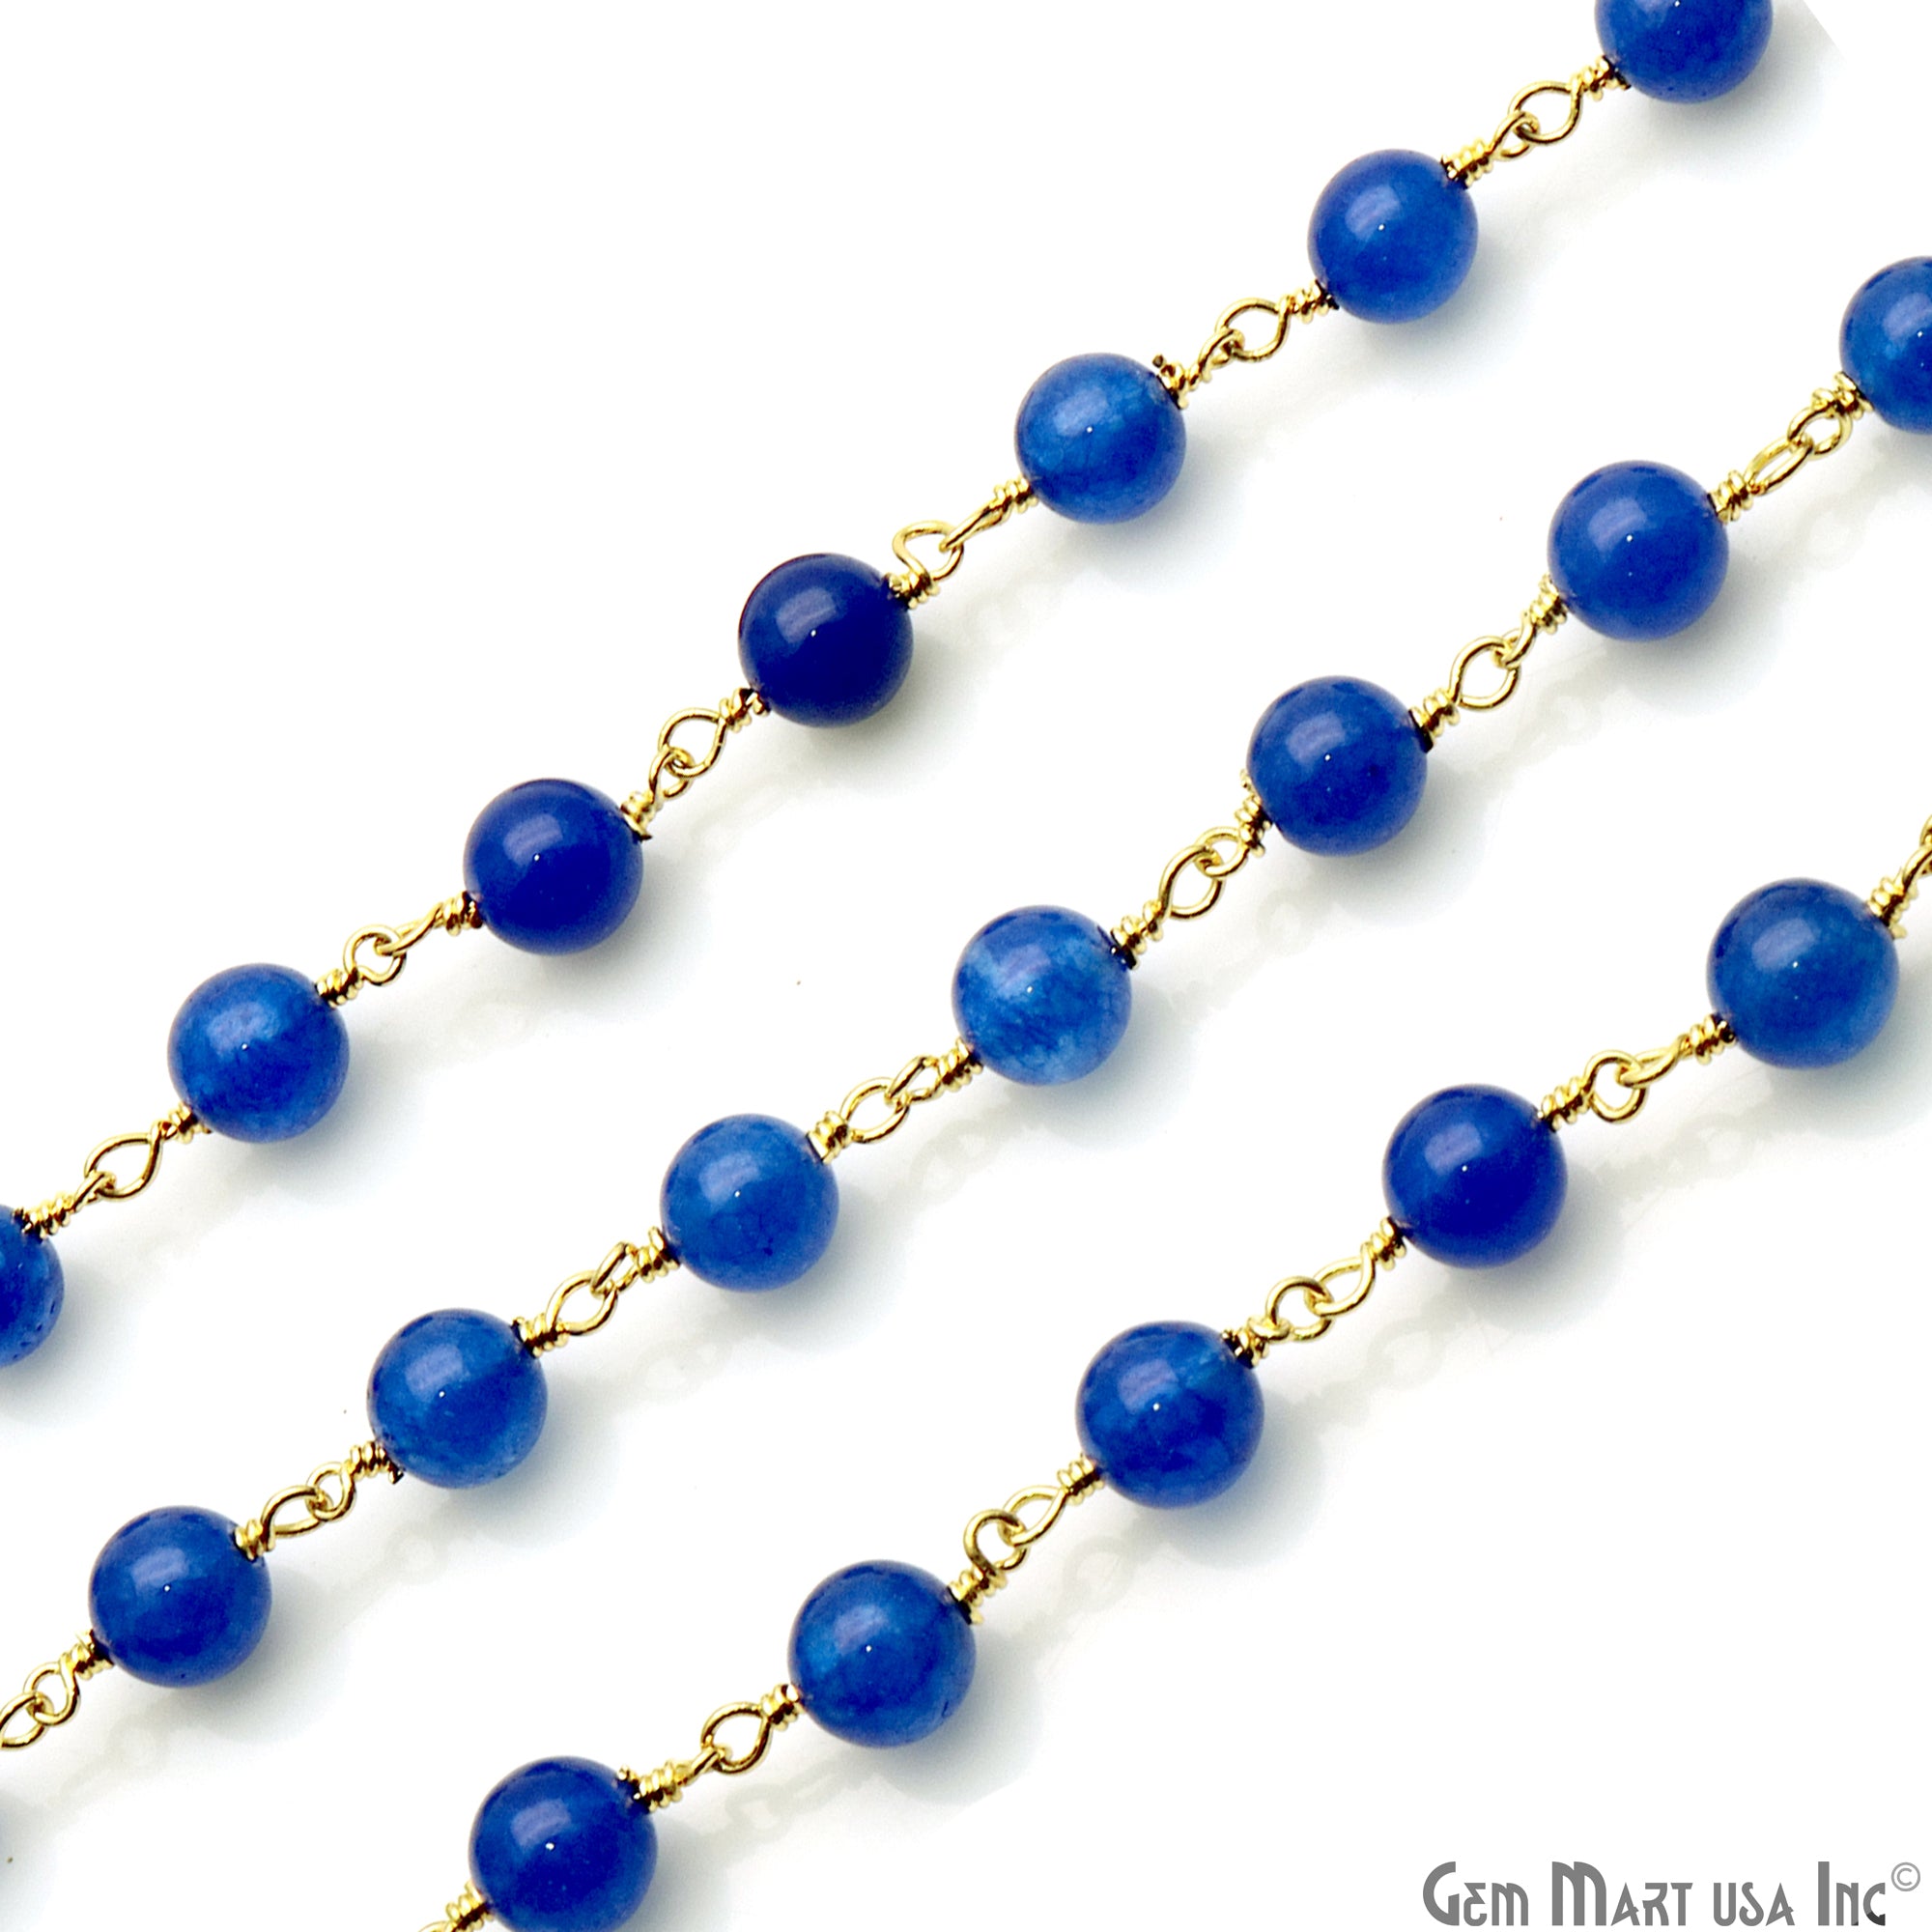 Blue Jade Cabochon Beads 6mm Gold Wire Wrapped Rosary Chain - GemMartUSA